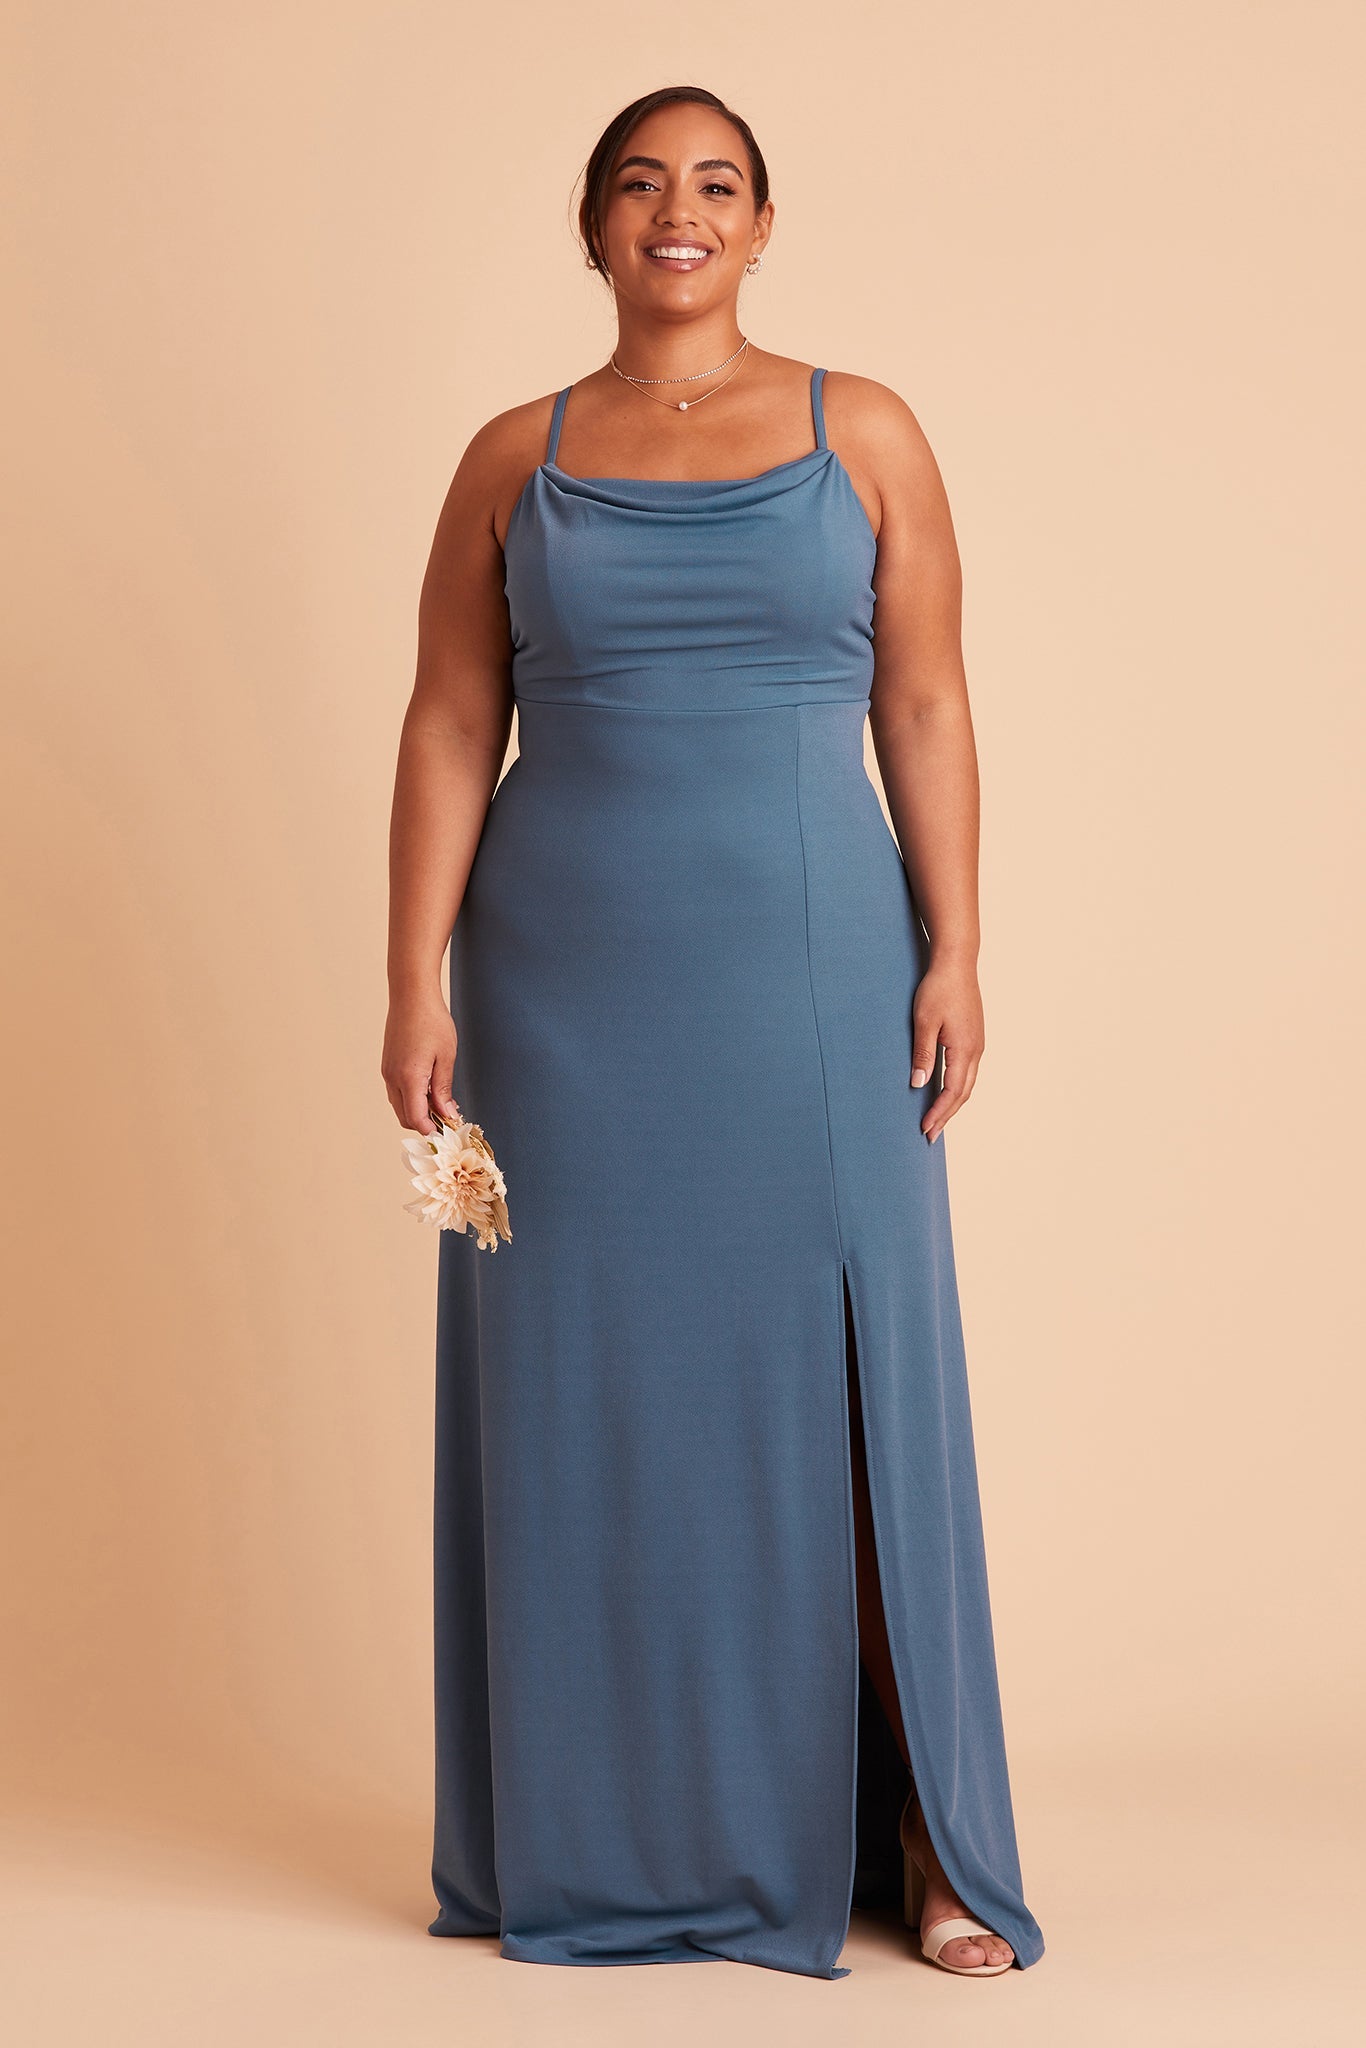 Ash plus size bridesmaid dress with slit in twilight crepe by Birdy Grey, front view